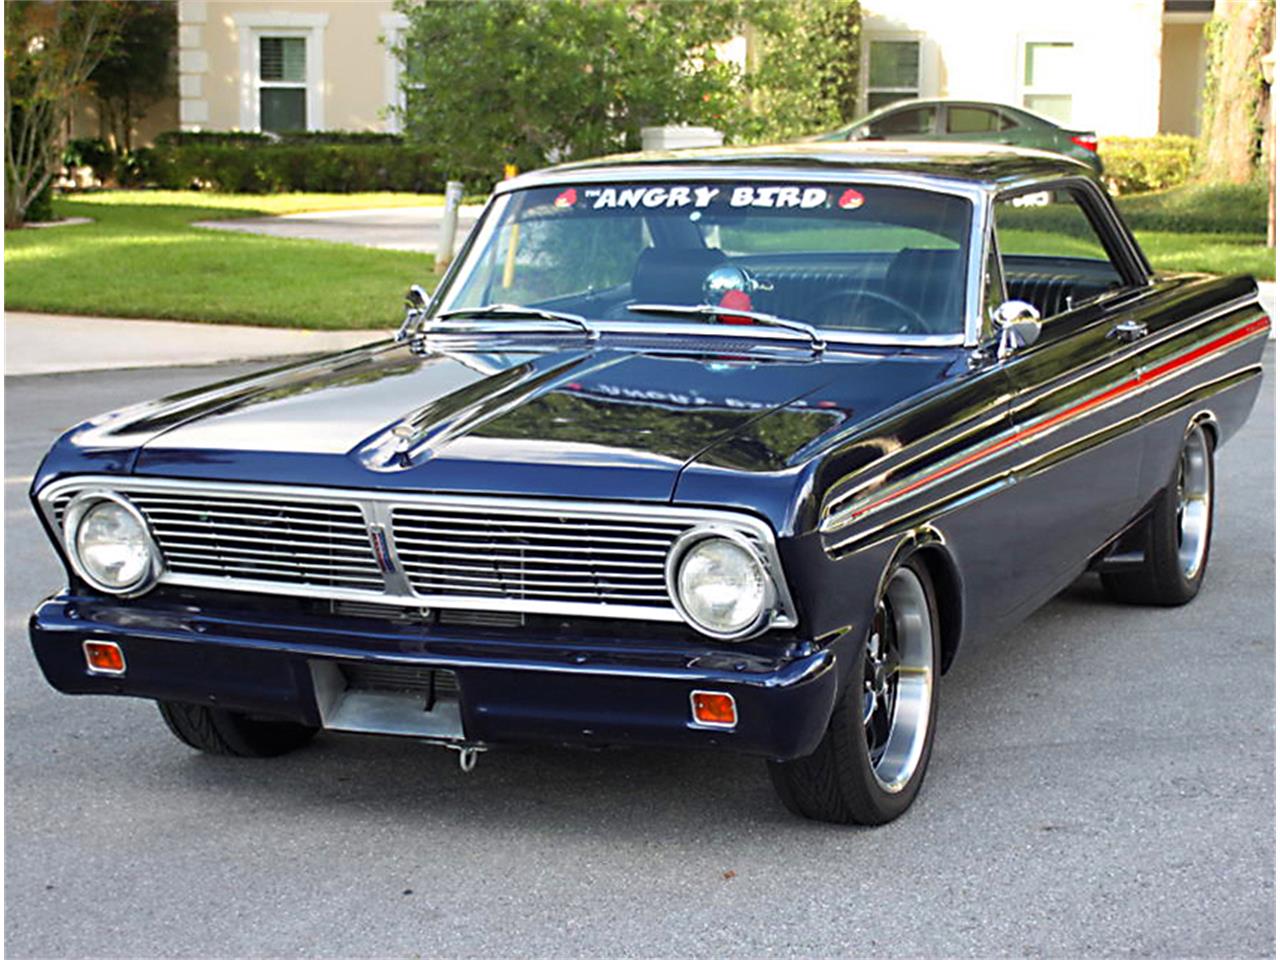 1965 Ford Falcon Used Parts